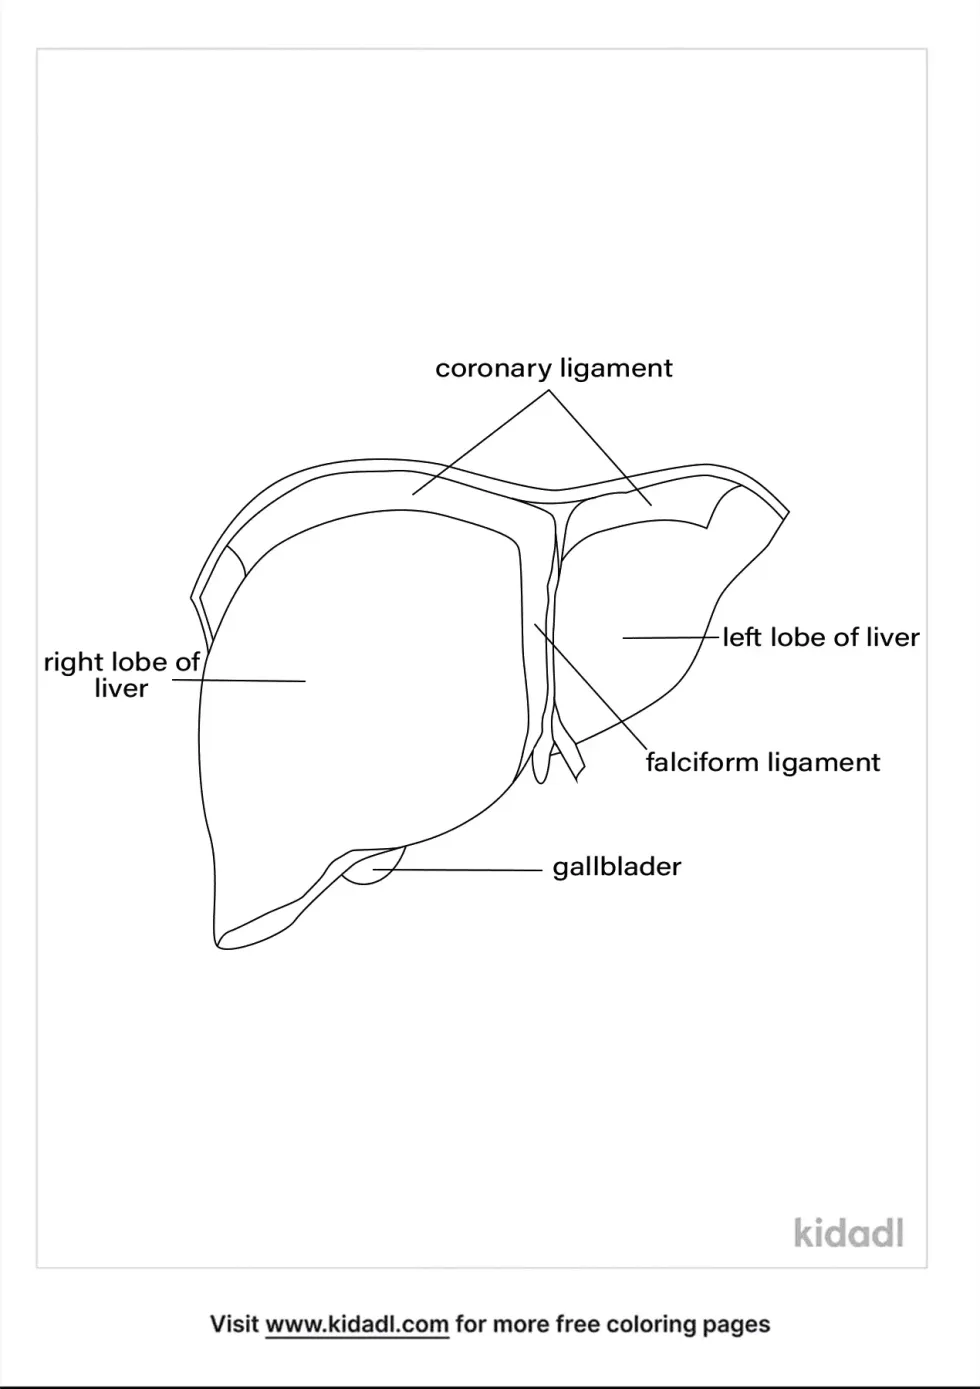 Liver Ligaments Anterior Coloring Page